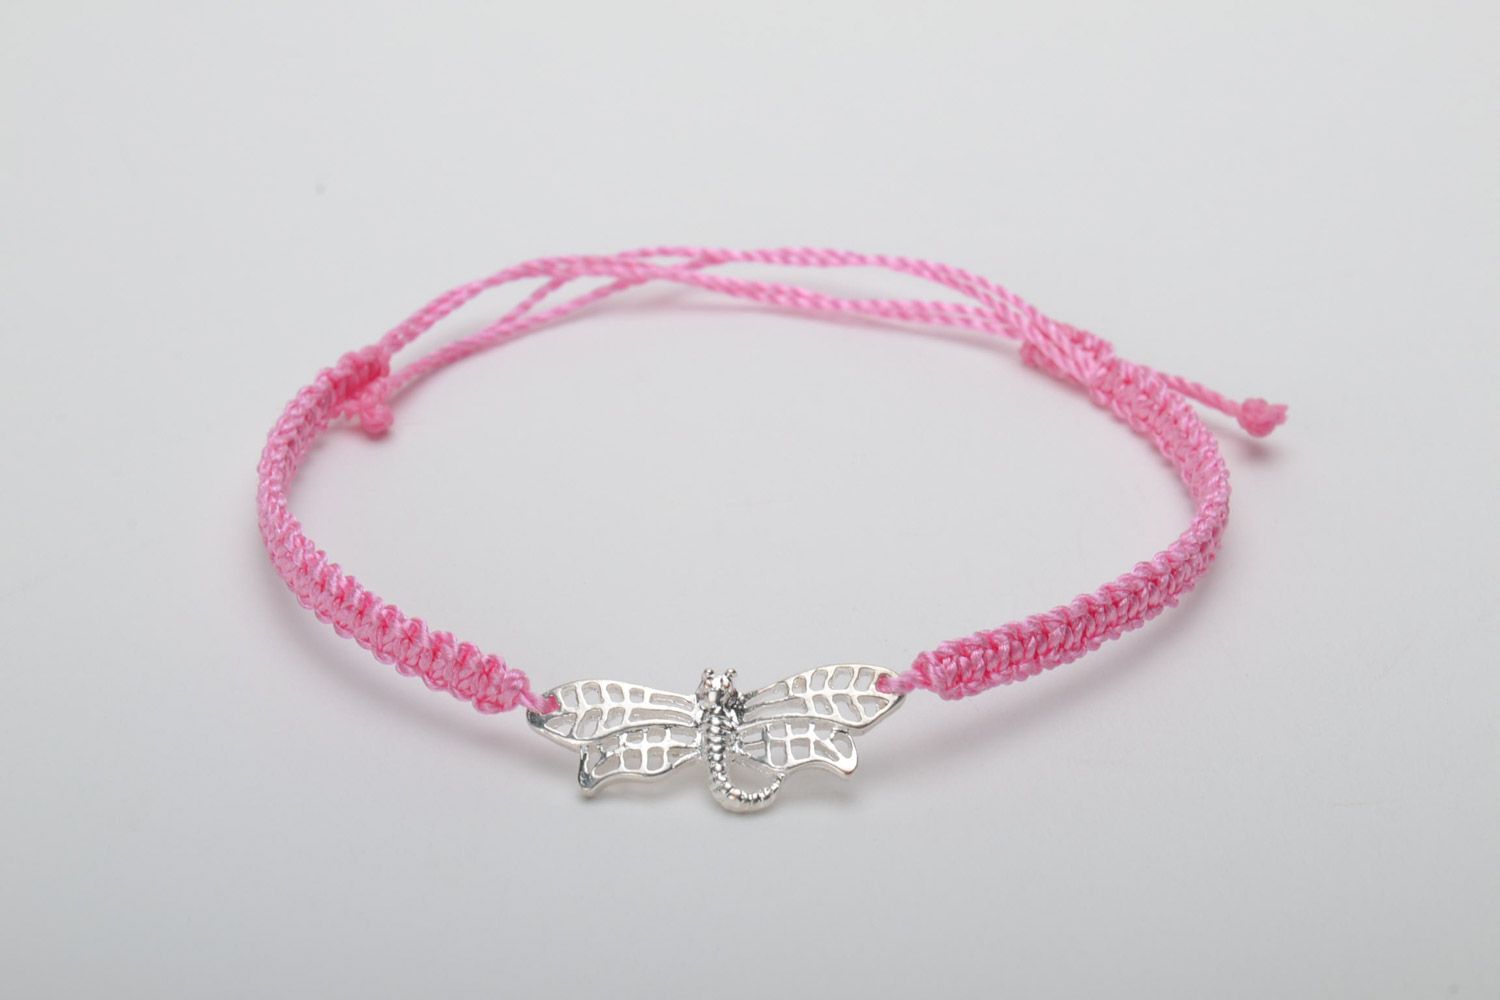 Handmade pink women's woven capron thread bracelet with metal charm in the shape of butterfly photo 5